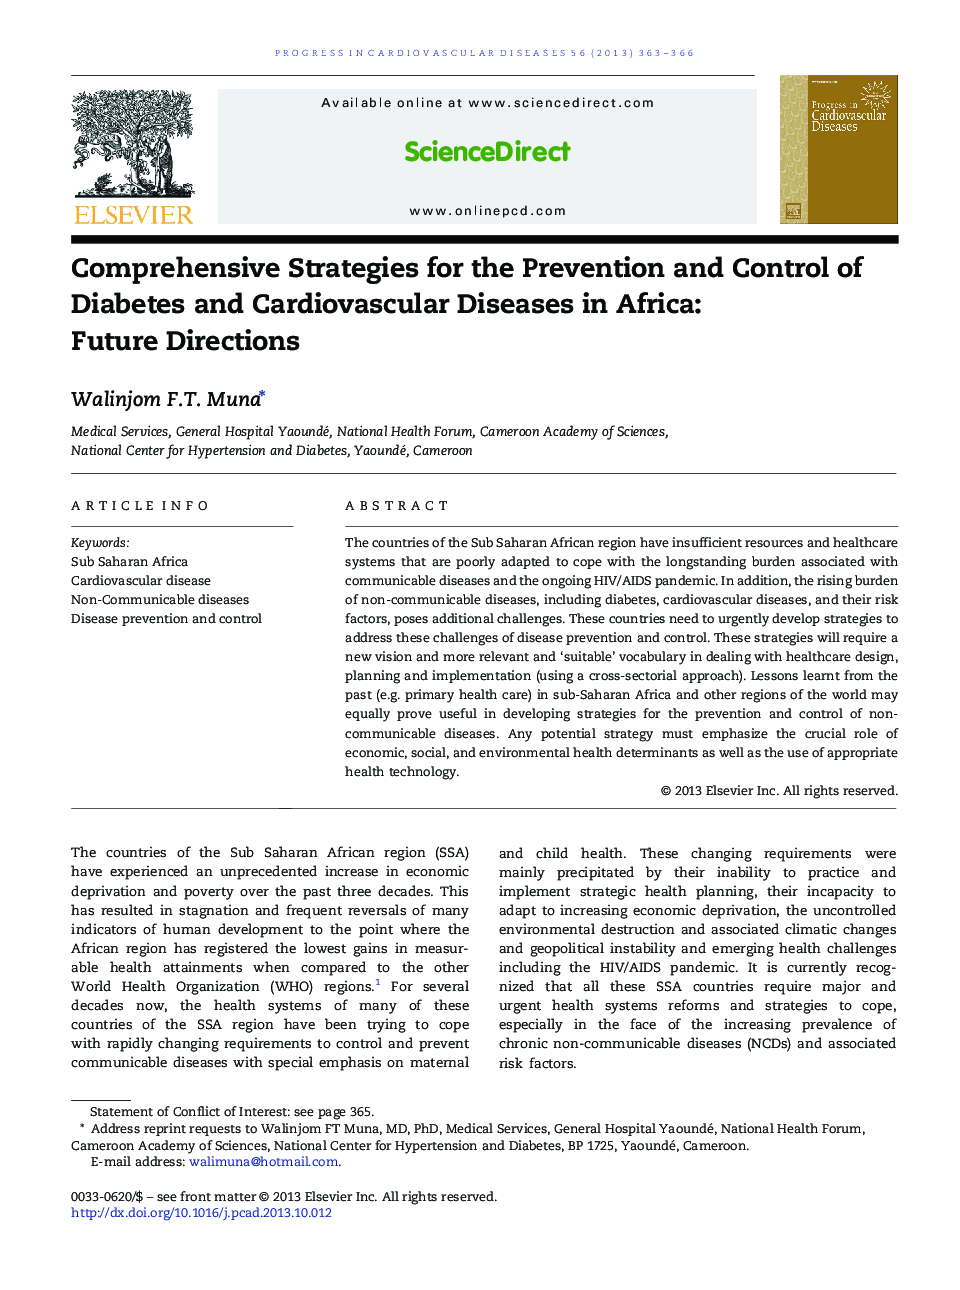 Comprehensive Strategies for the Prevention and Control of Diabetes and Cardiovascular Diseases in Africa: Future Directions 